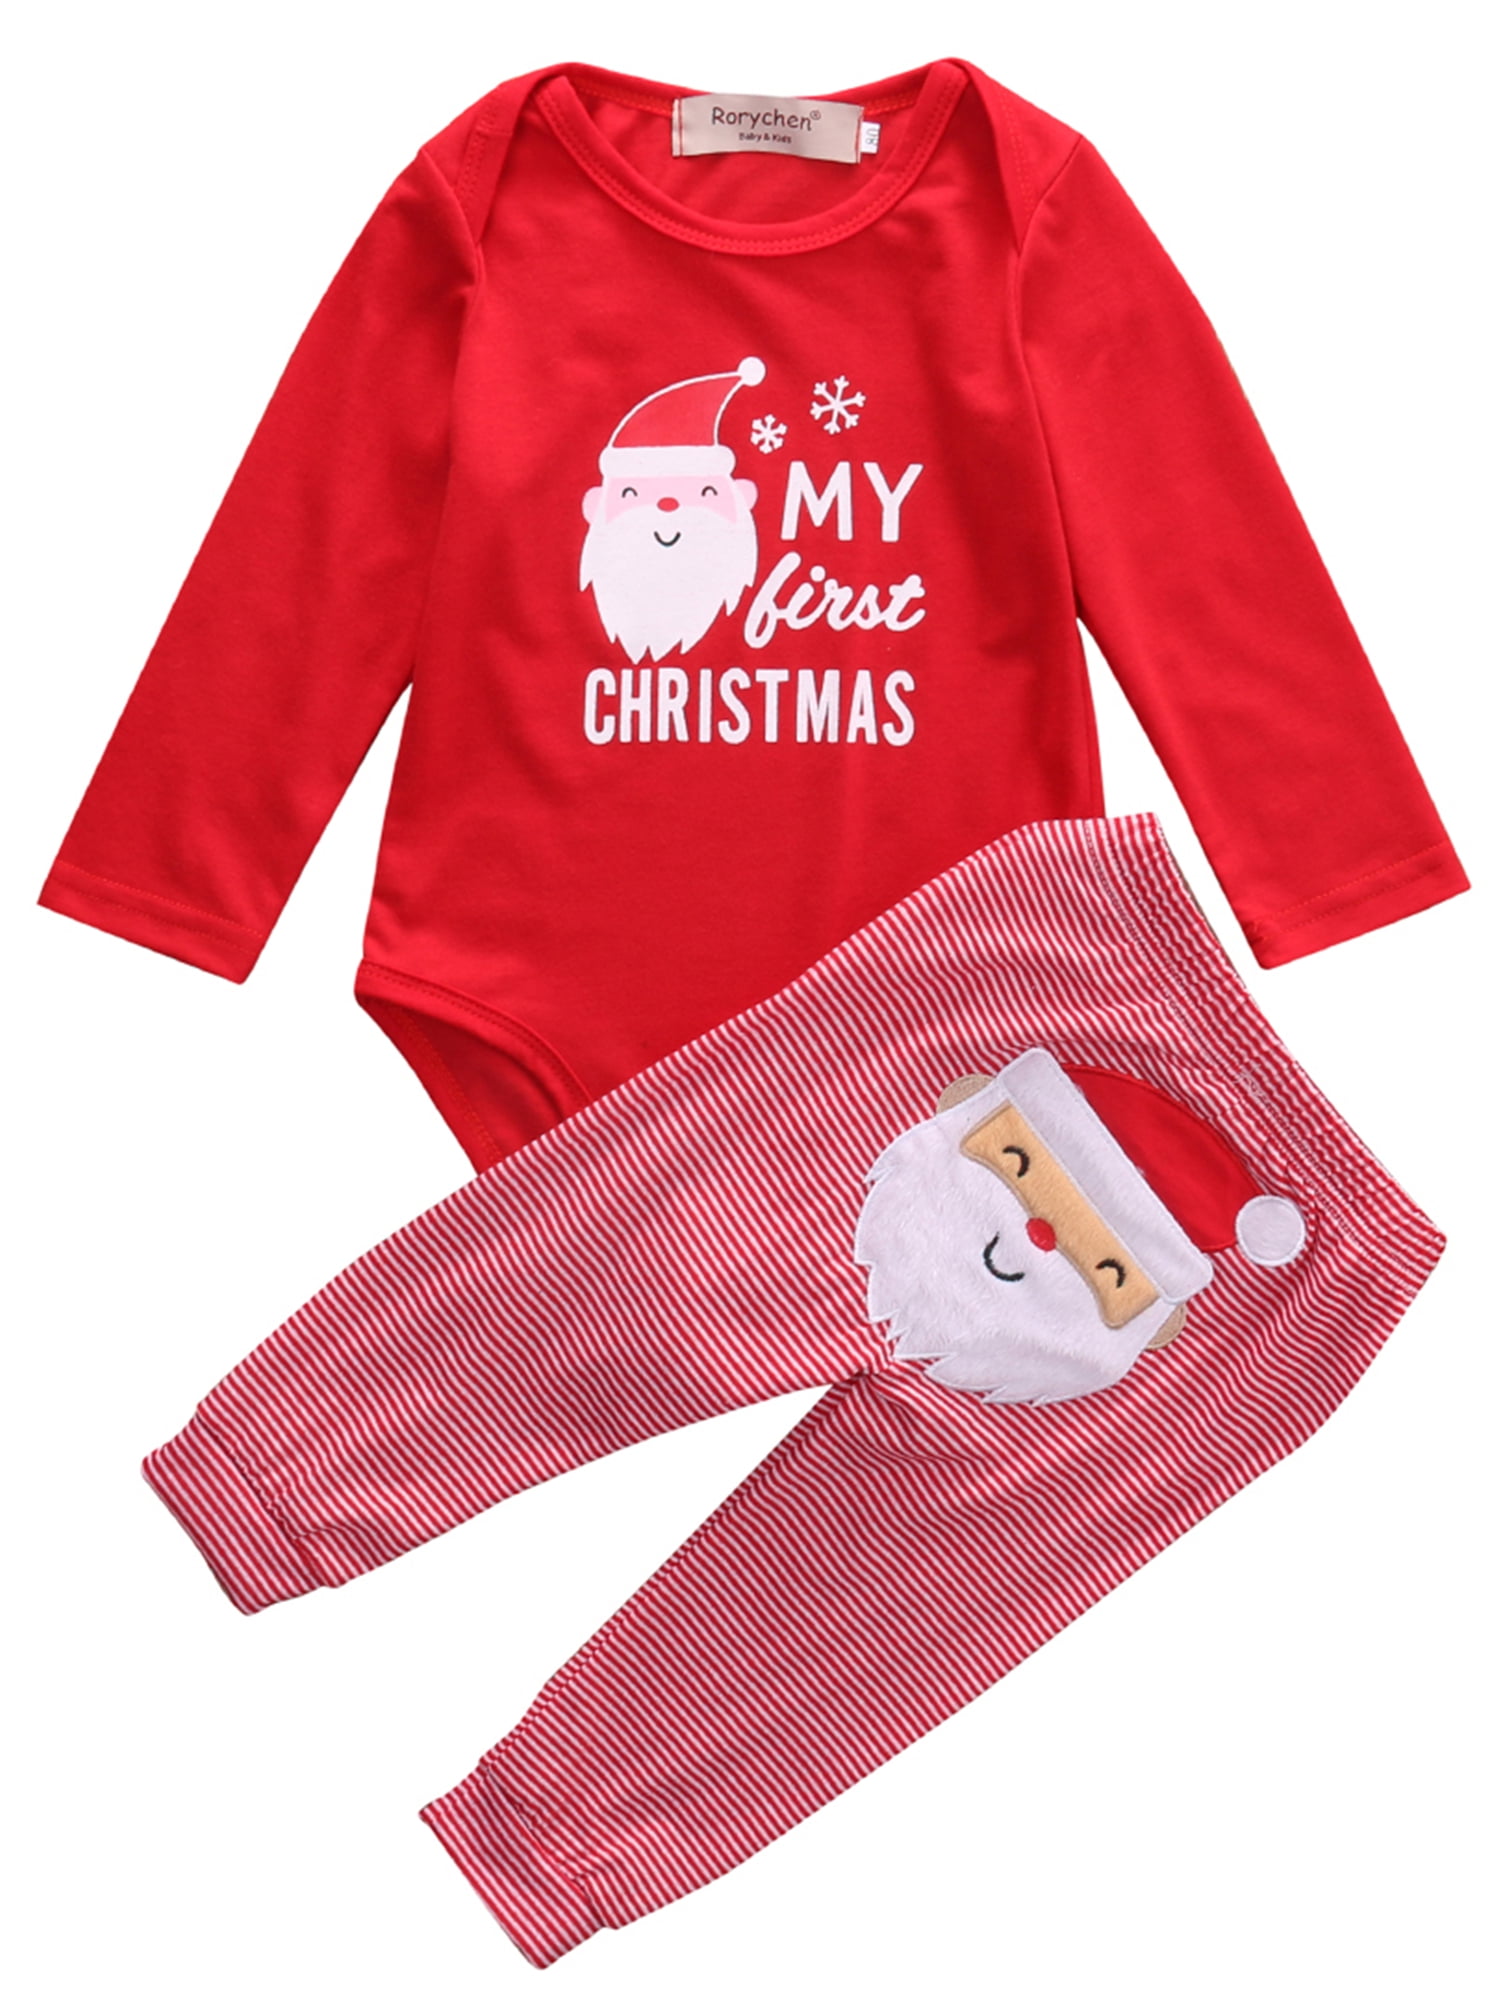 Details about   Baby Girls Boys Infant My First Christmas Top Pants Set Legging Xmas Outfit Suit